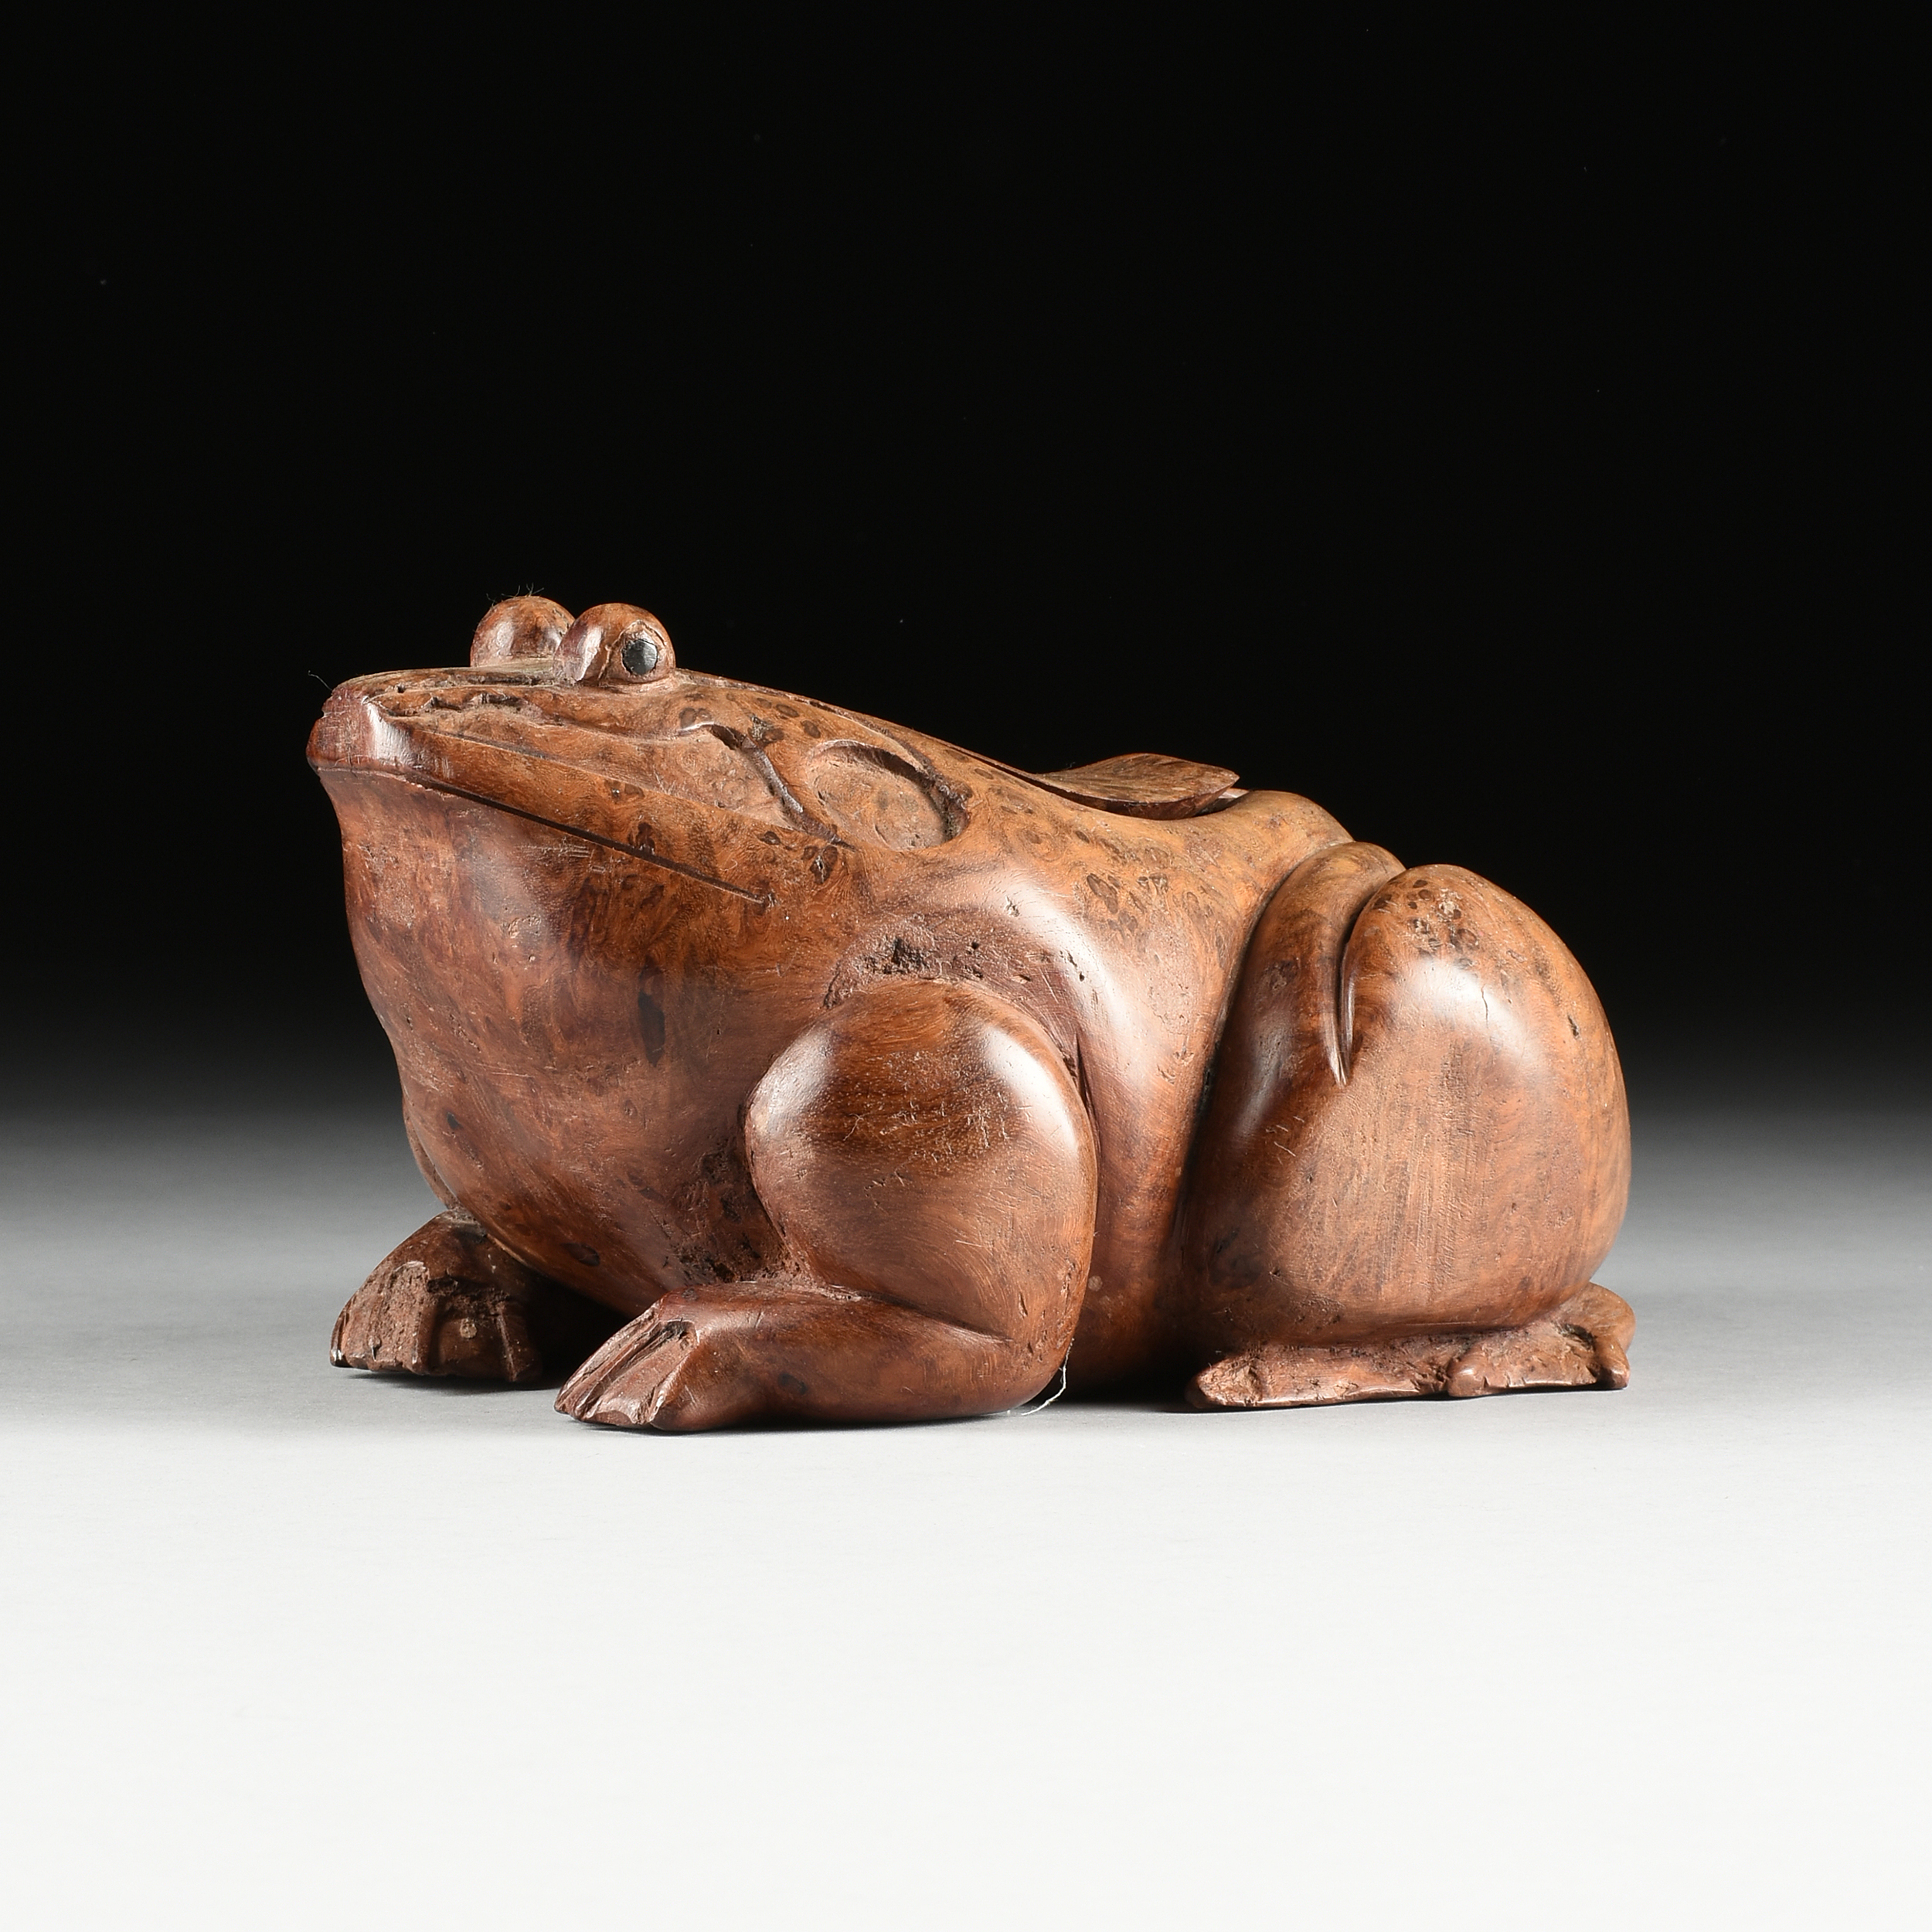 A SOUTH EAST ASIAN CARVED BURL WOOD FROG FORM BOX, POSSIBLY INDONESIAN/VIETNAMESE, 20TH CENTURY,